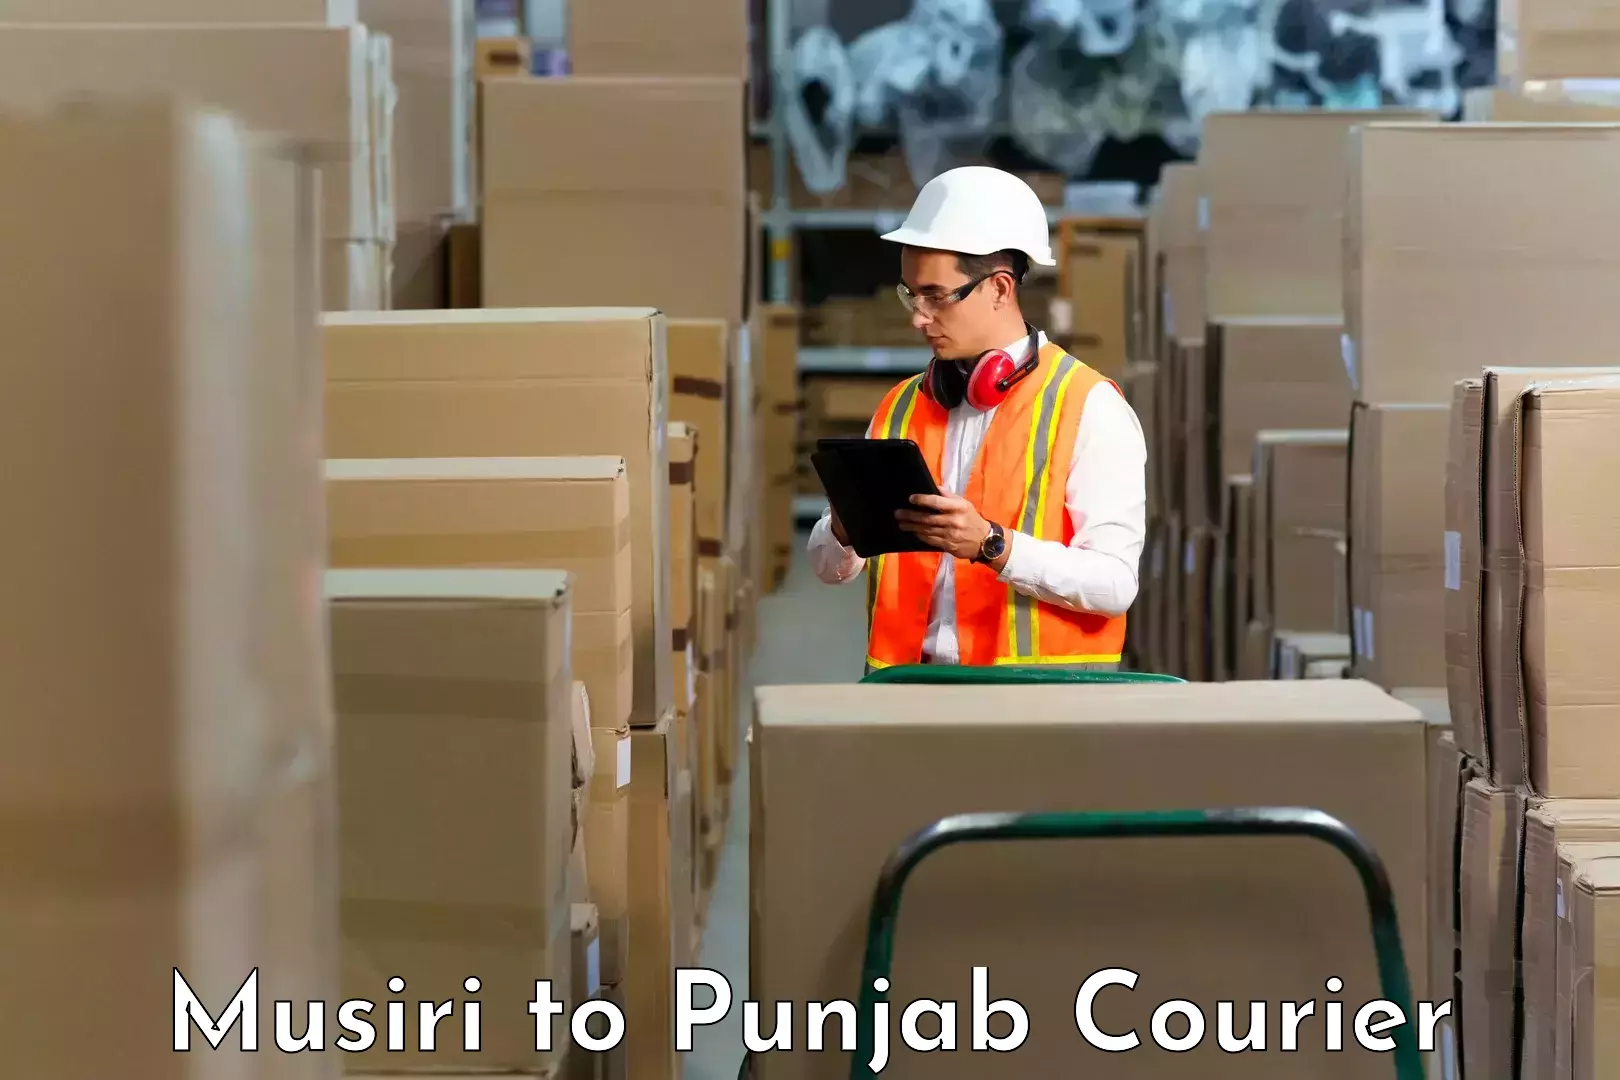 Local delivery service Musiri to Punjab